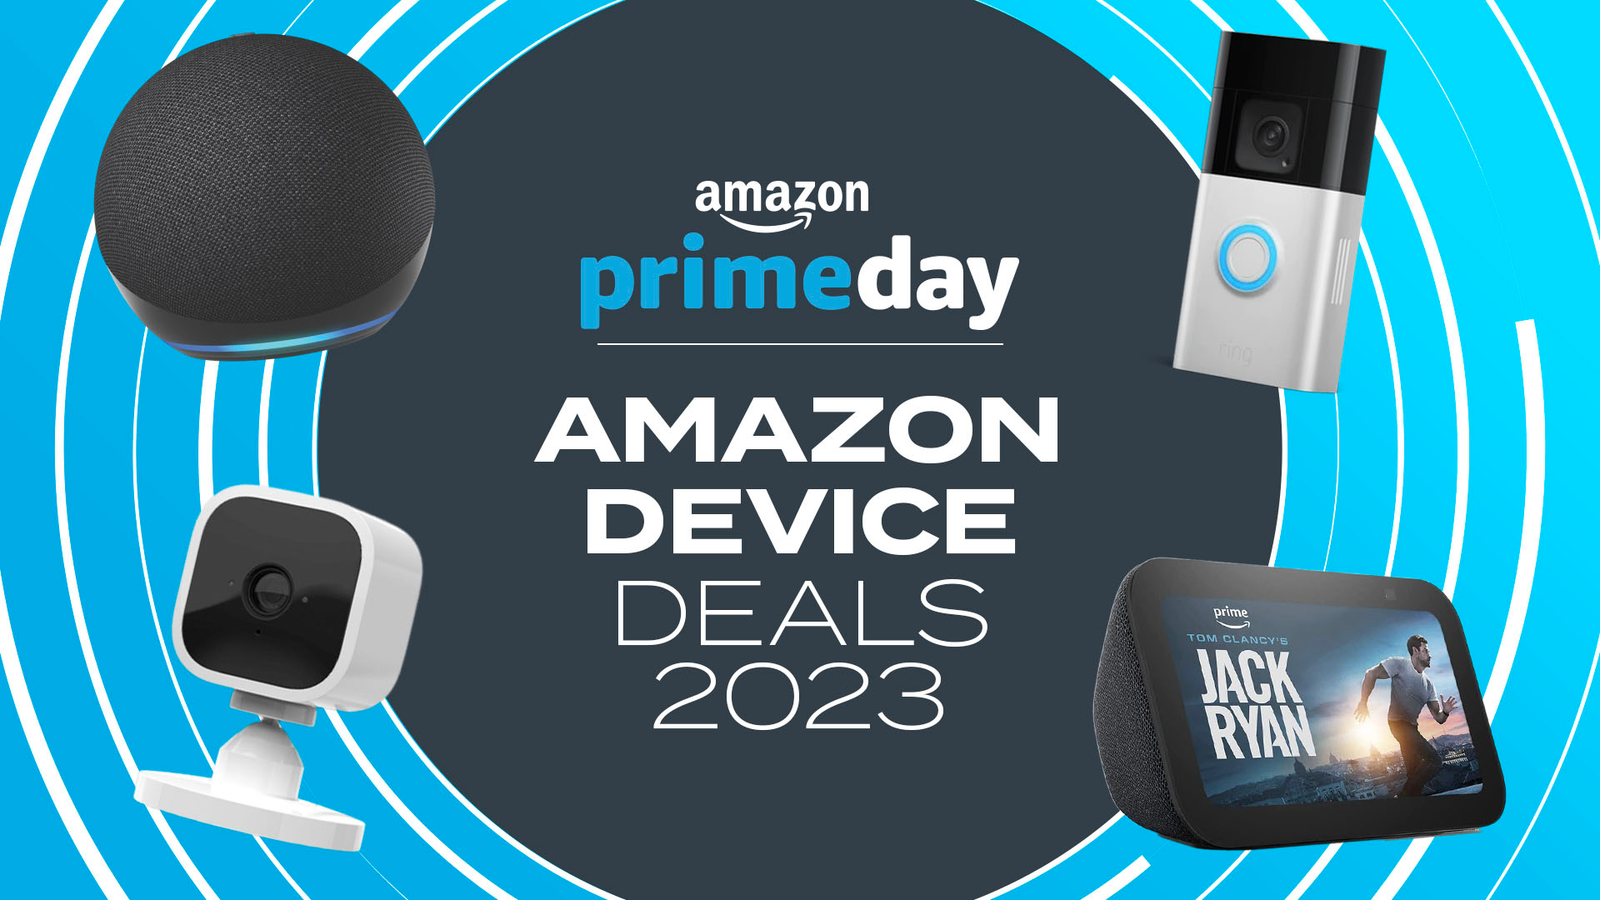  Prime of Day Deals Today 2023 - Prime of Day Deals